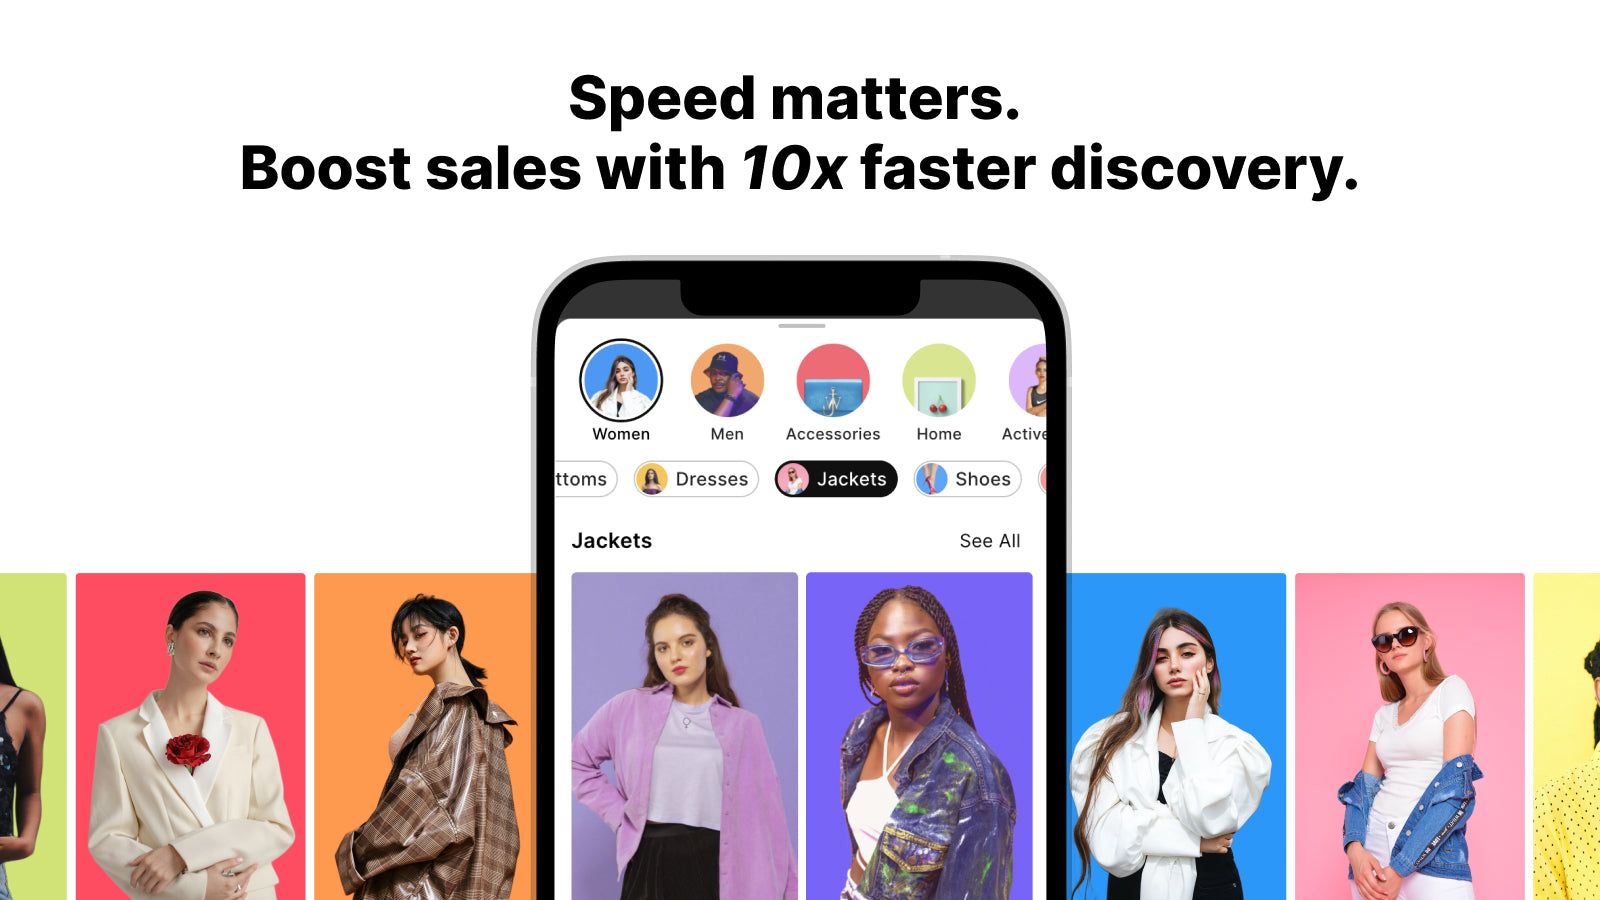 10x Faster, boost sales and conversion by reducing friction